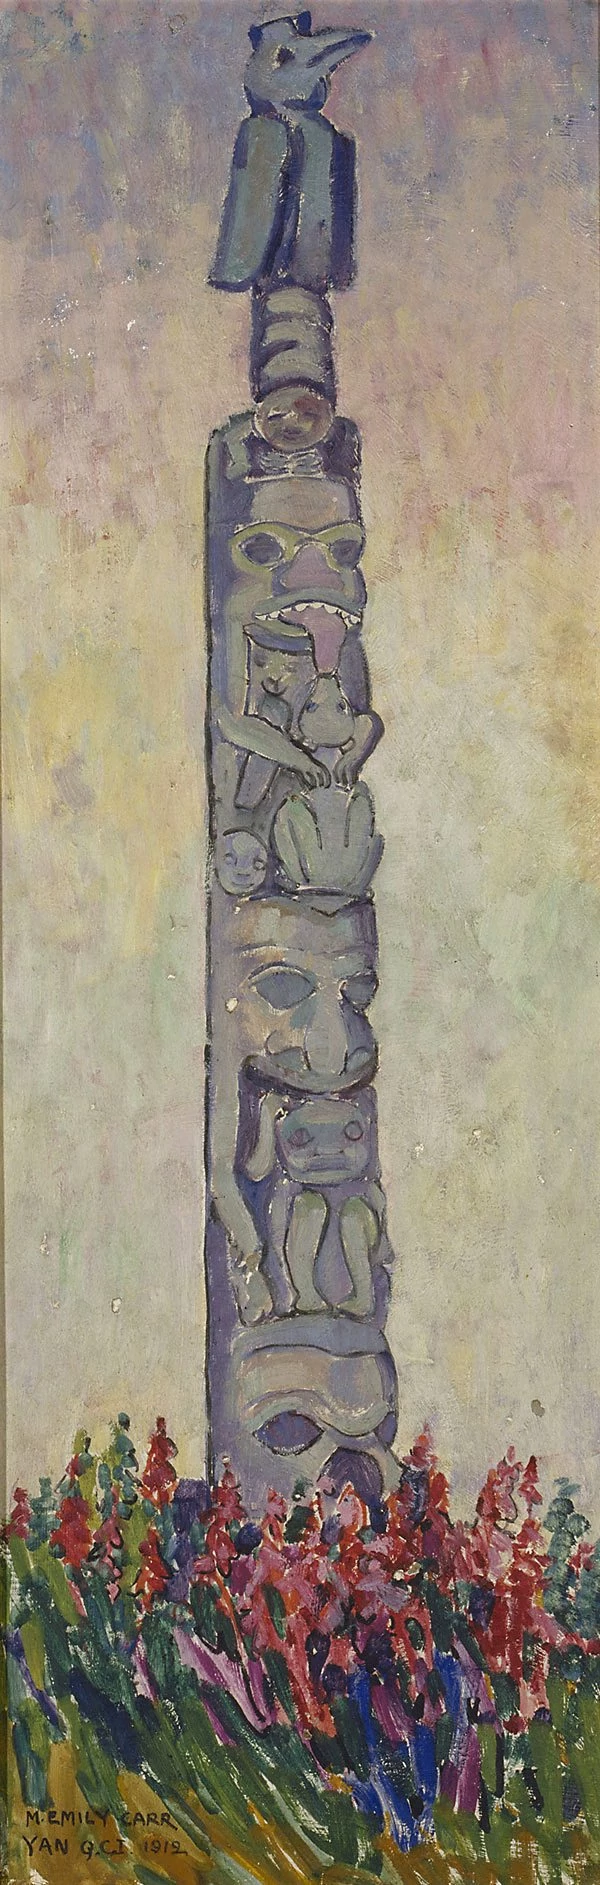 Indian Totem pole, Yan, Queen Charlotte Islands, Emily Carr